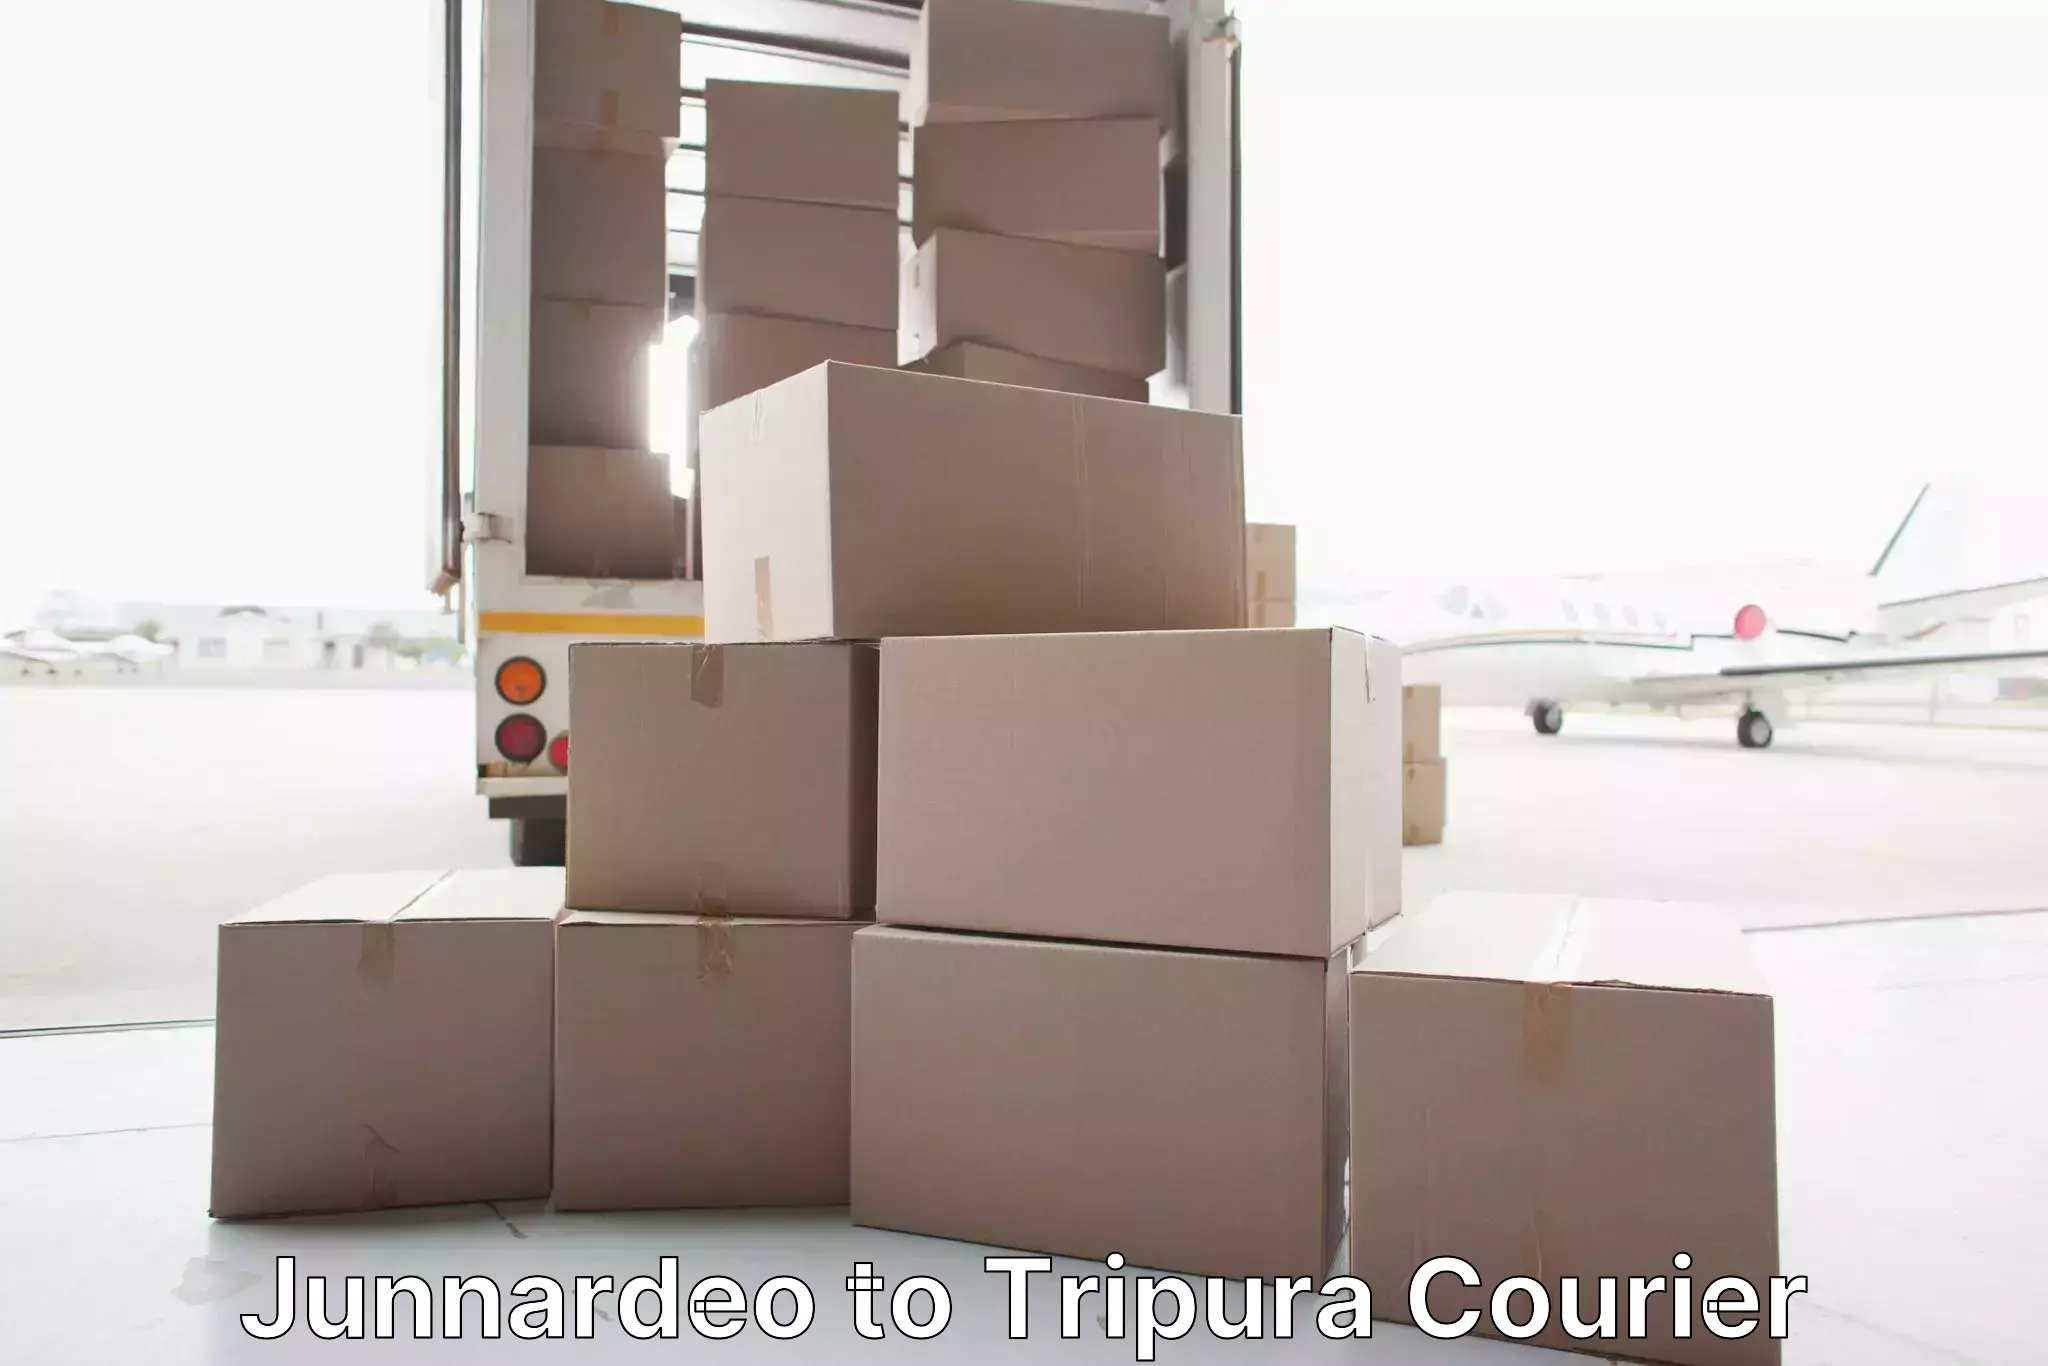 Reliable furniture movers Junnardeo to Amarpur